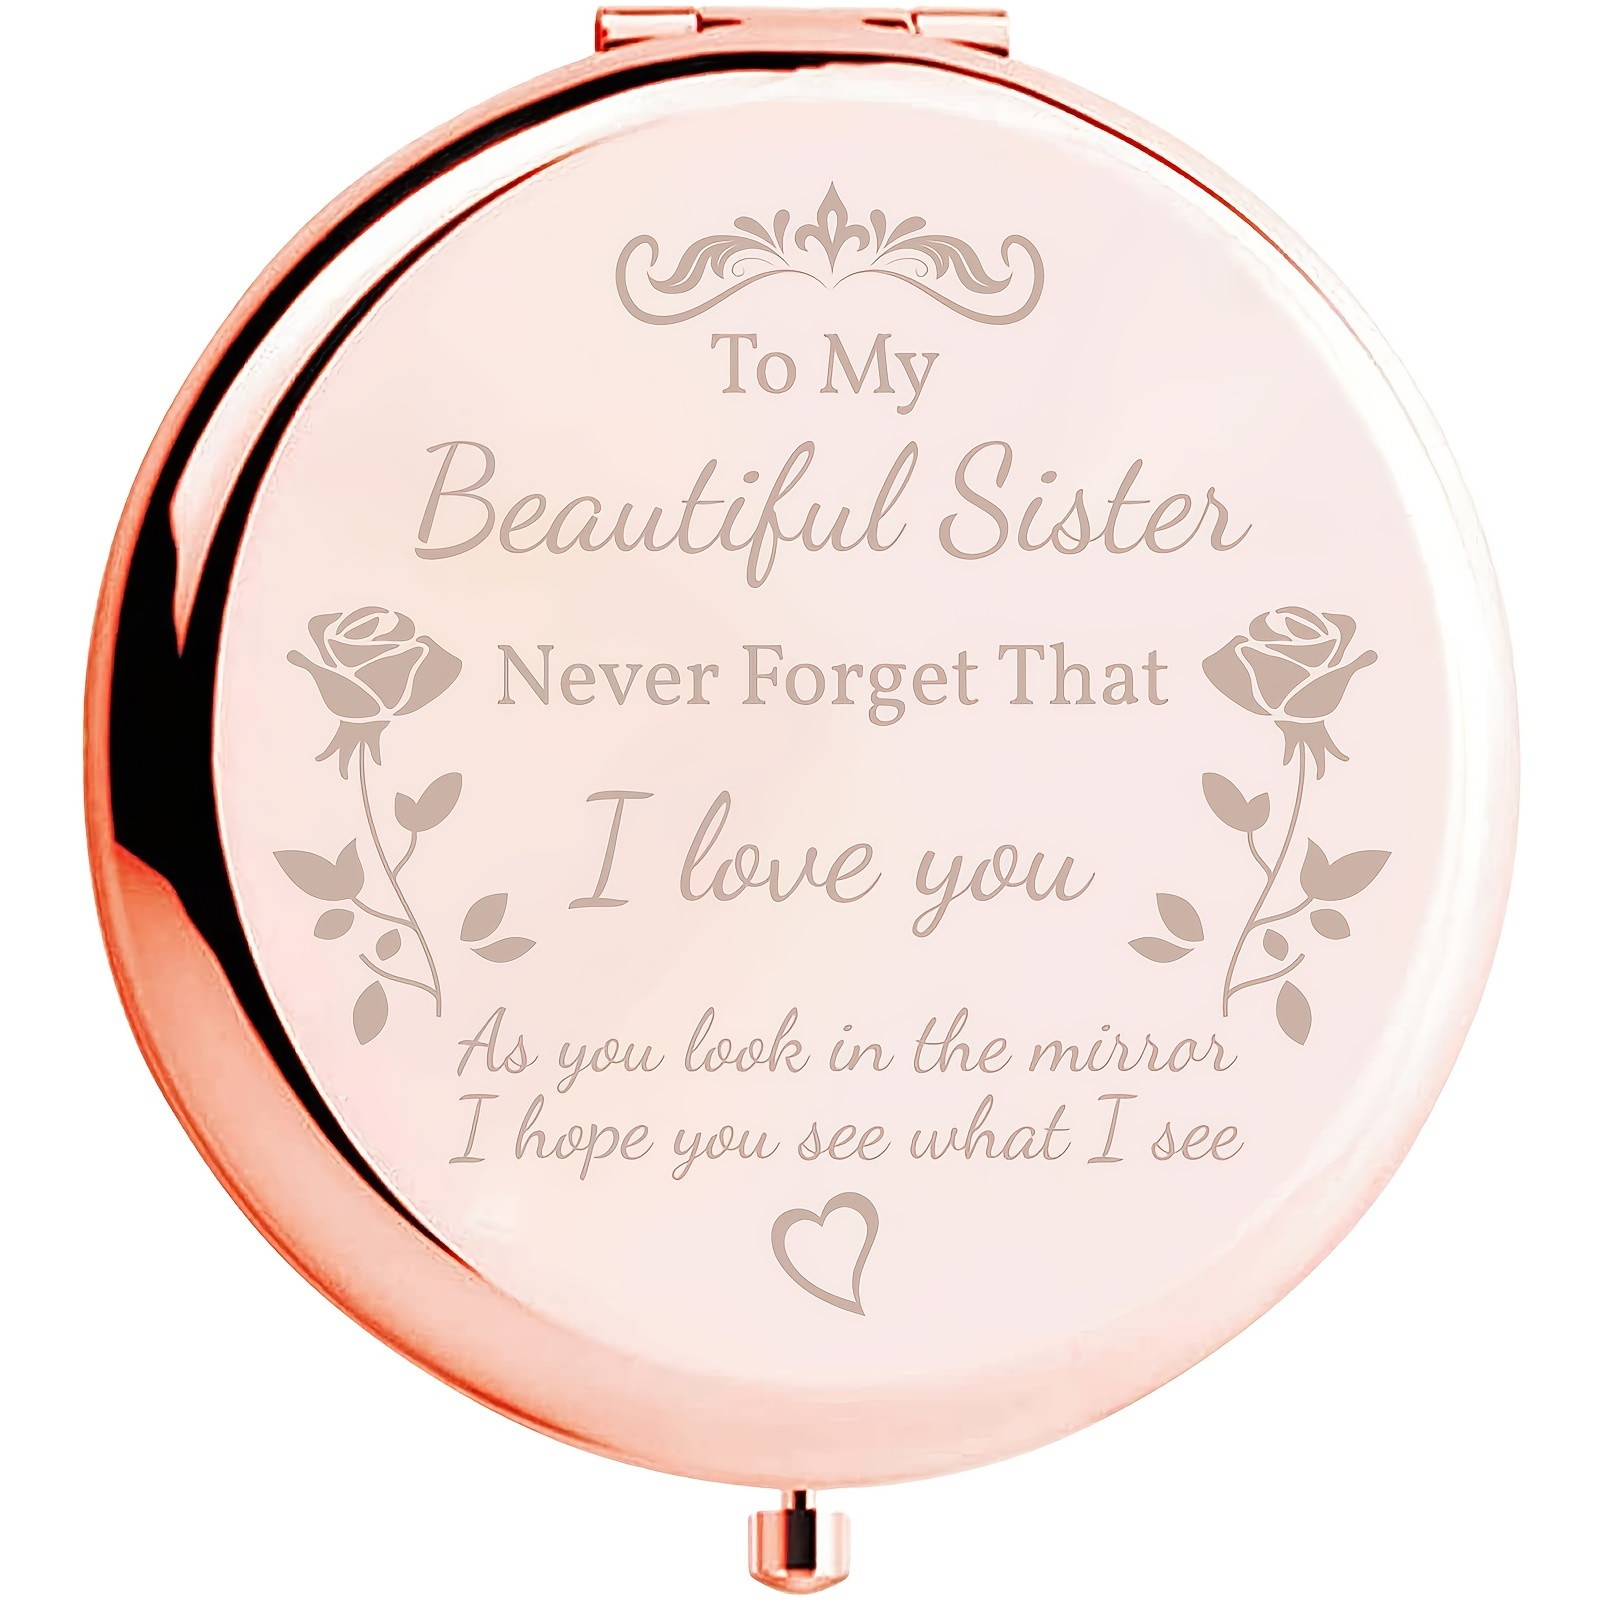 

Sister Gifts Compact Mirror, To My Beautiful Sister Gorgeous Rose Gold Makeup Mirror Unique Friendship Gift For Women Girls Sisters Best Friends Gift For Women Sister Gifts From Sister